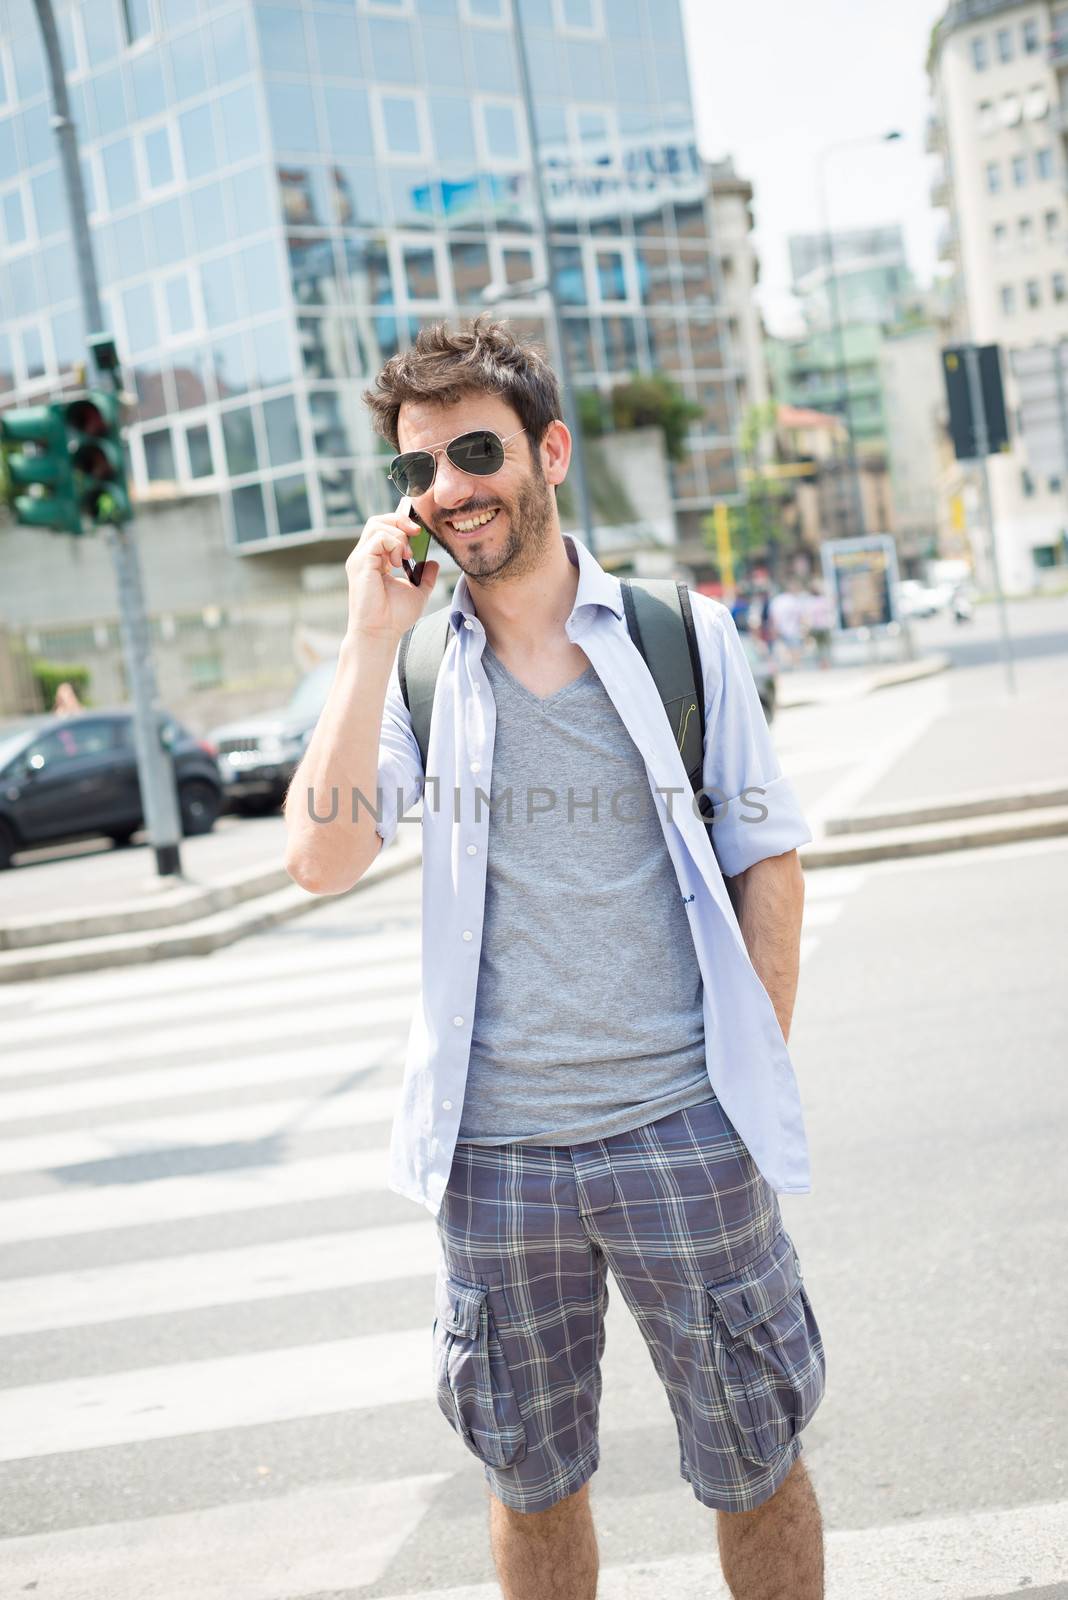 man in the street on the phone by peus